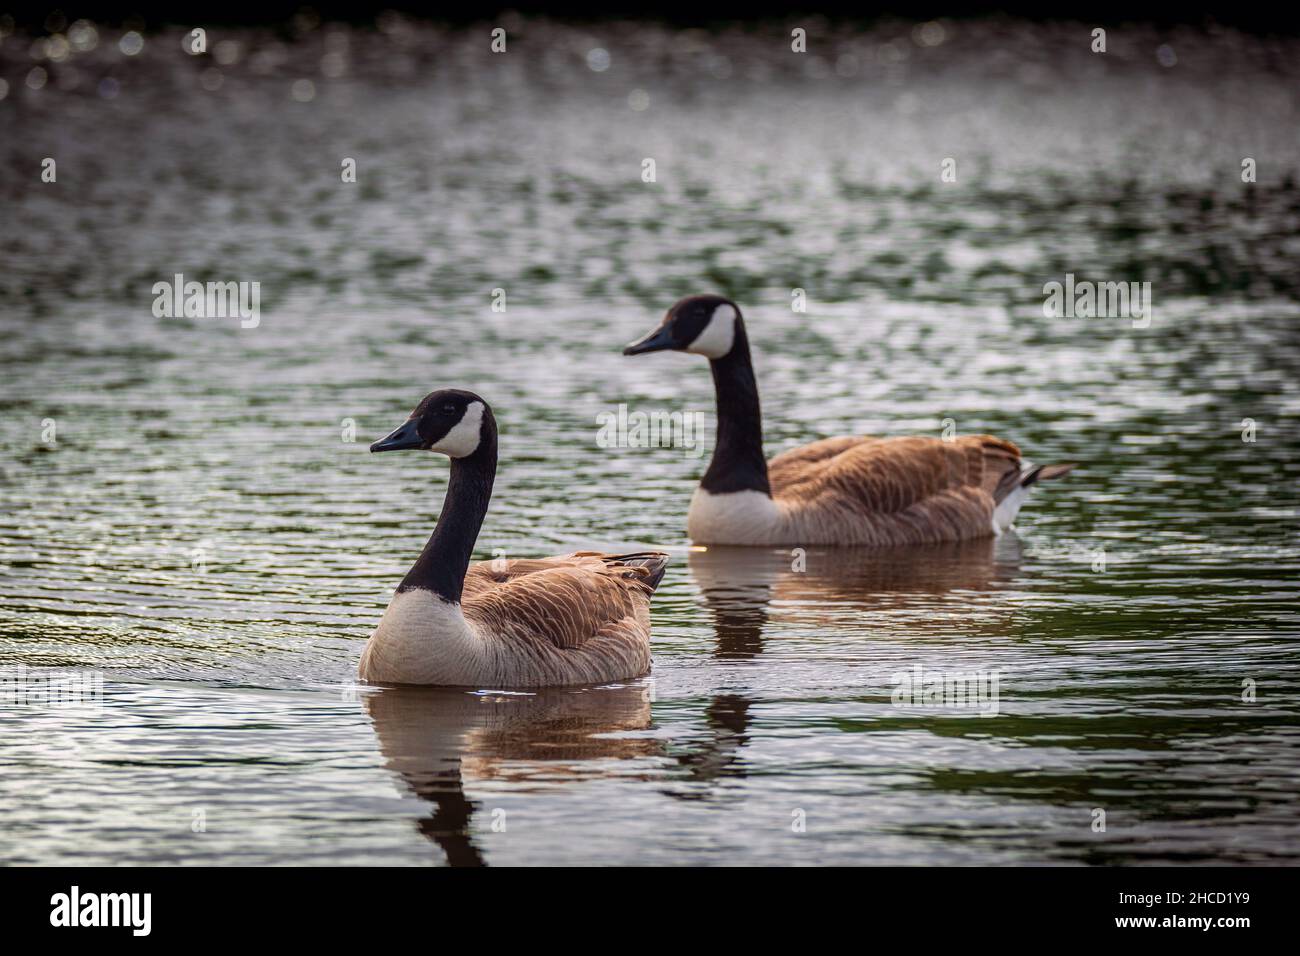 Pair of Canadian geese on a lake in the marshlands Stock Photo